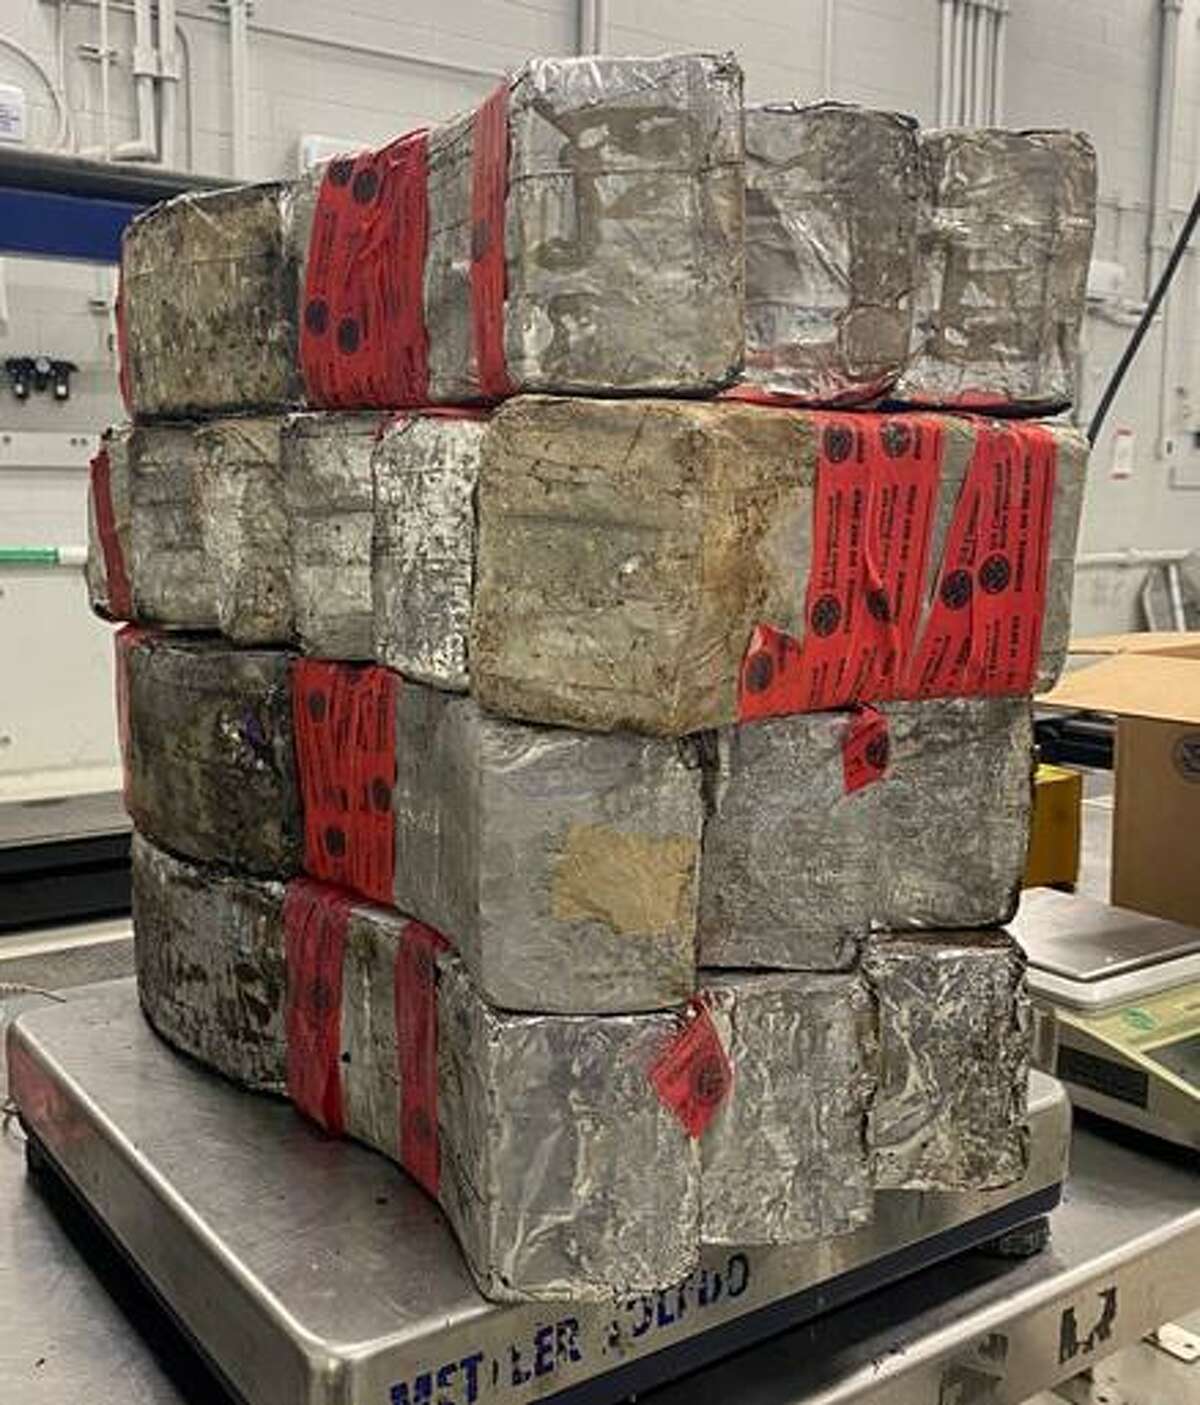 U.S. Customs and Border Protection officers said they seized these 132.36 pounds of meth valued at about $2.6 million at the Juarez-Lincoln International Bridge. One person has been indicted in connection with the case.